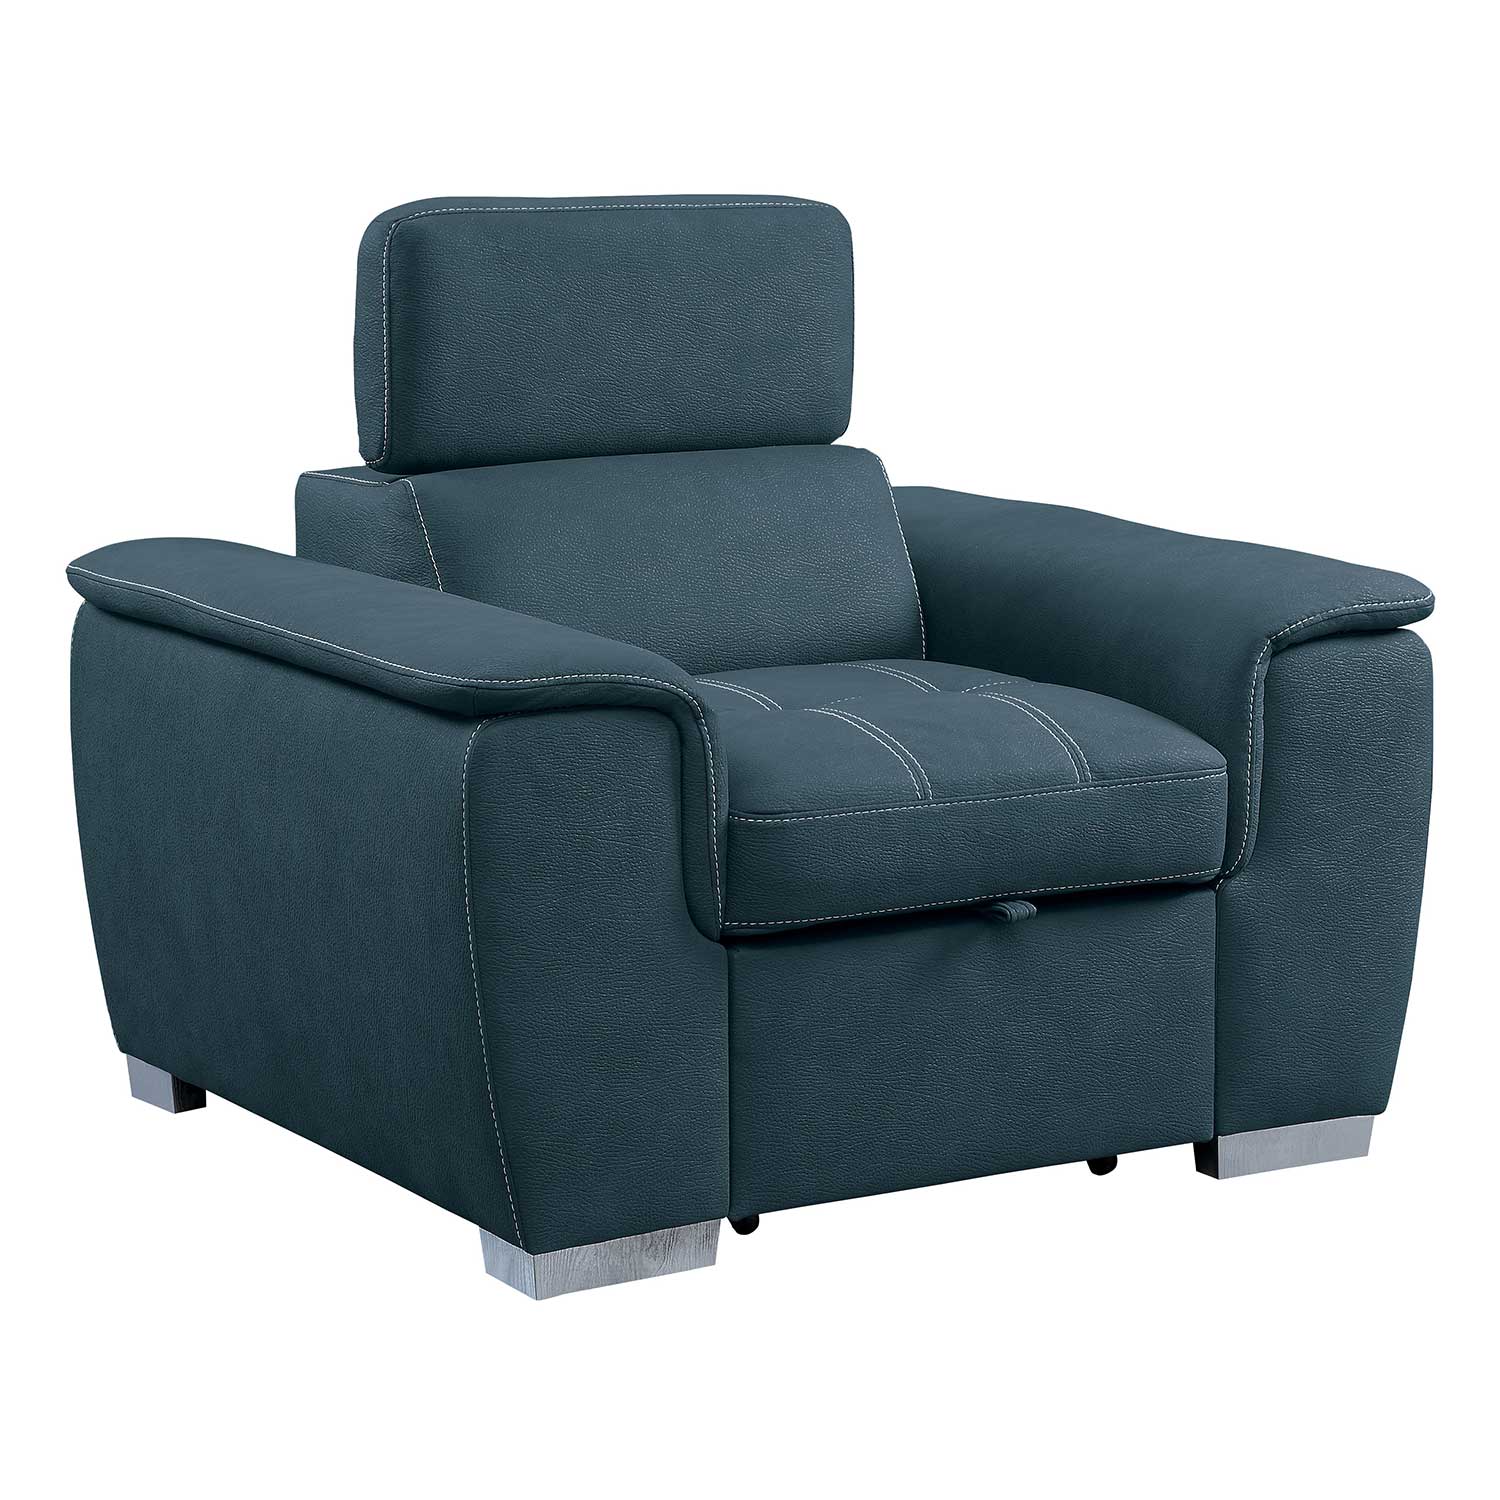 Homelegance Ferriday Chair with Pull-out Ottoman - Blue